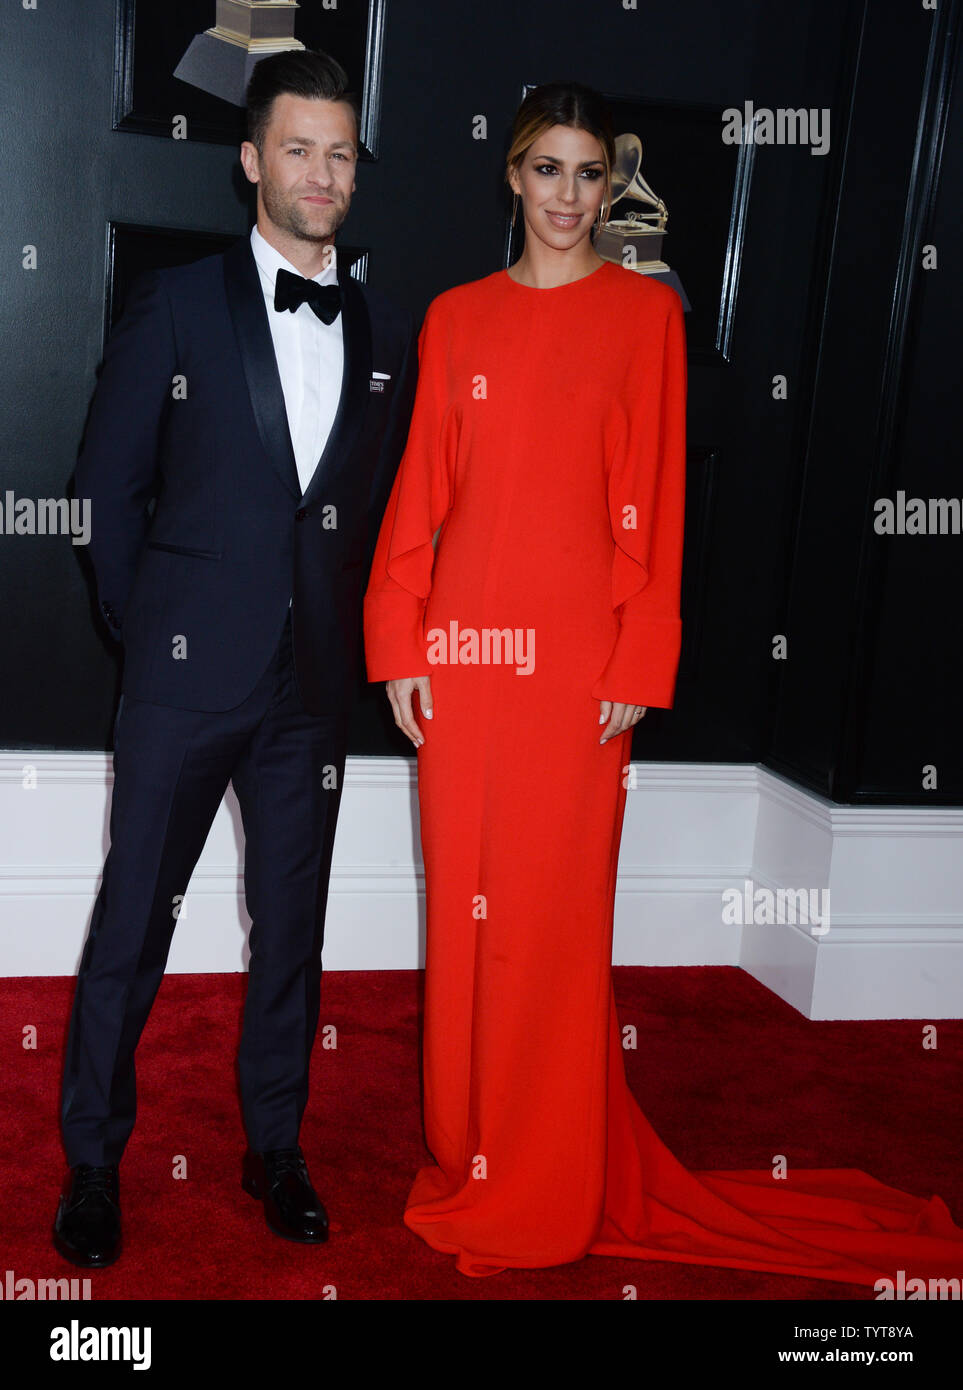 Recording artist Ben Fielding and Brooke Fraser of musical group Hillsong Worship arrive on the red carpet at the 60th Annual Grammy Awards ceremony at Madison Square Garden in New York City on January 28, 2018. The CBS network will broadcast the show live from Madison Square Garden in New York City. It will be the first time since 2003 that the ceremony will not be held in Los Angeles.       Photo by Dennis Van Tine/UPI Stock Photo